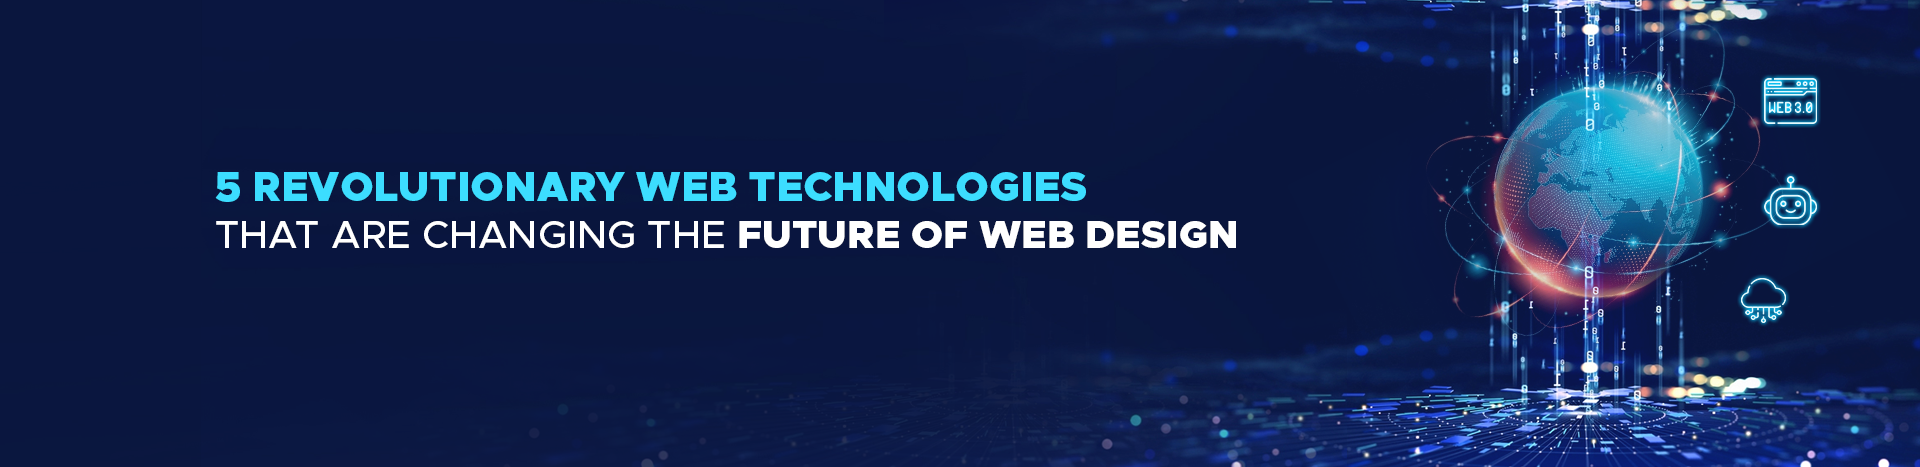 5-Revolutionary Web Technologies That Are Changing the Future of Web Design